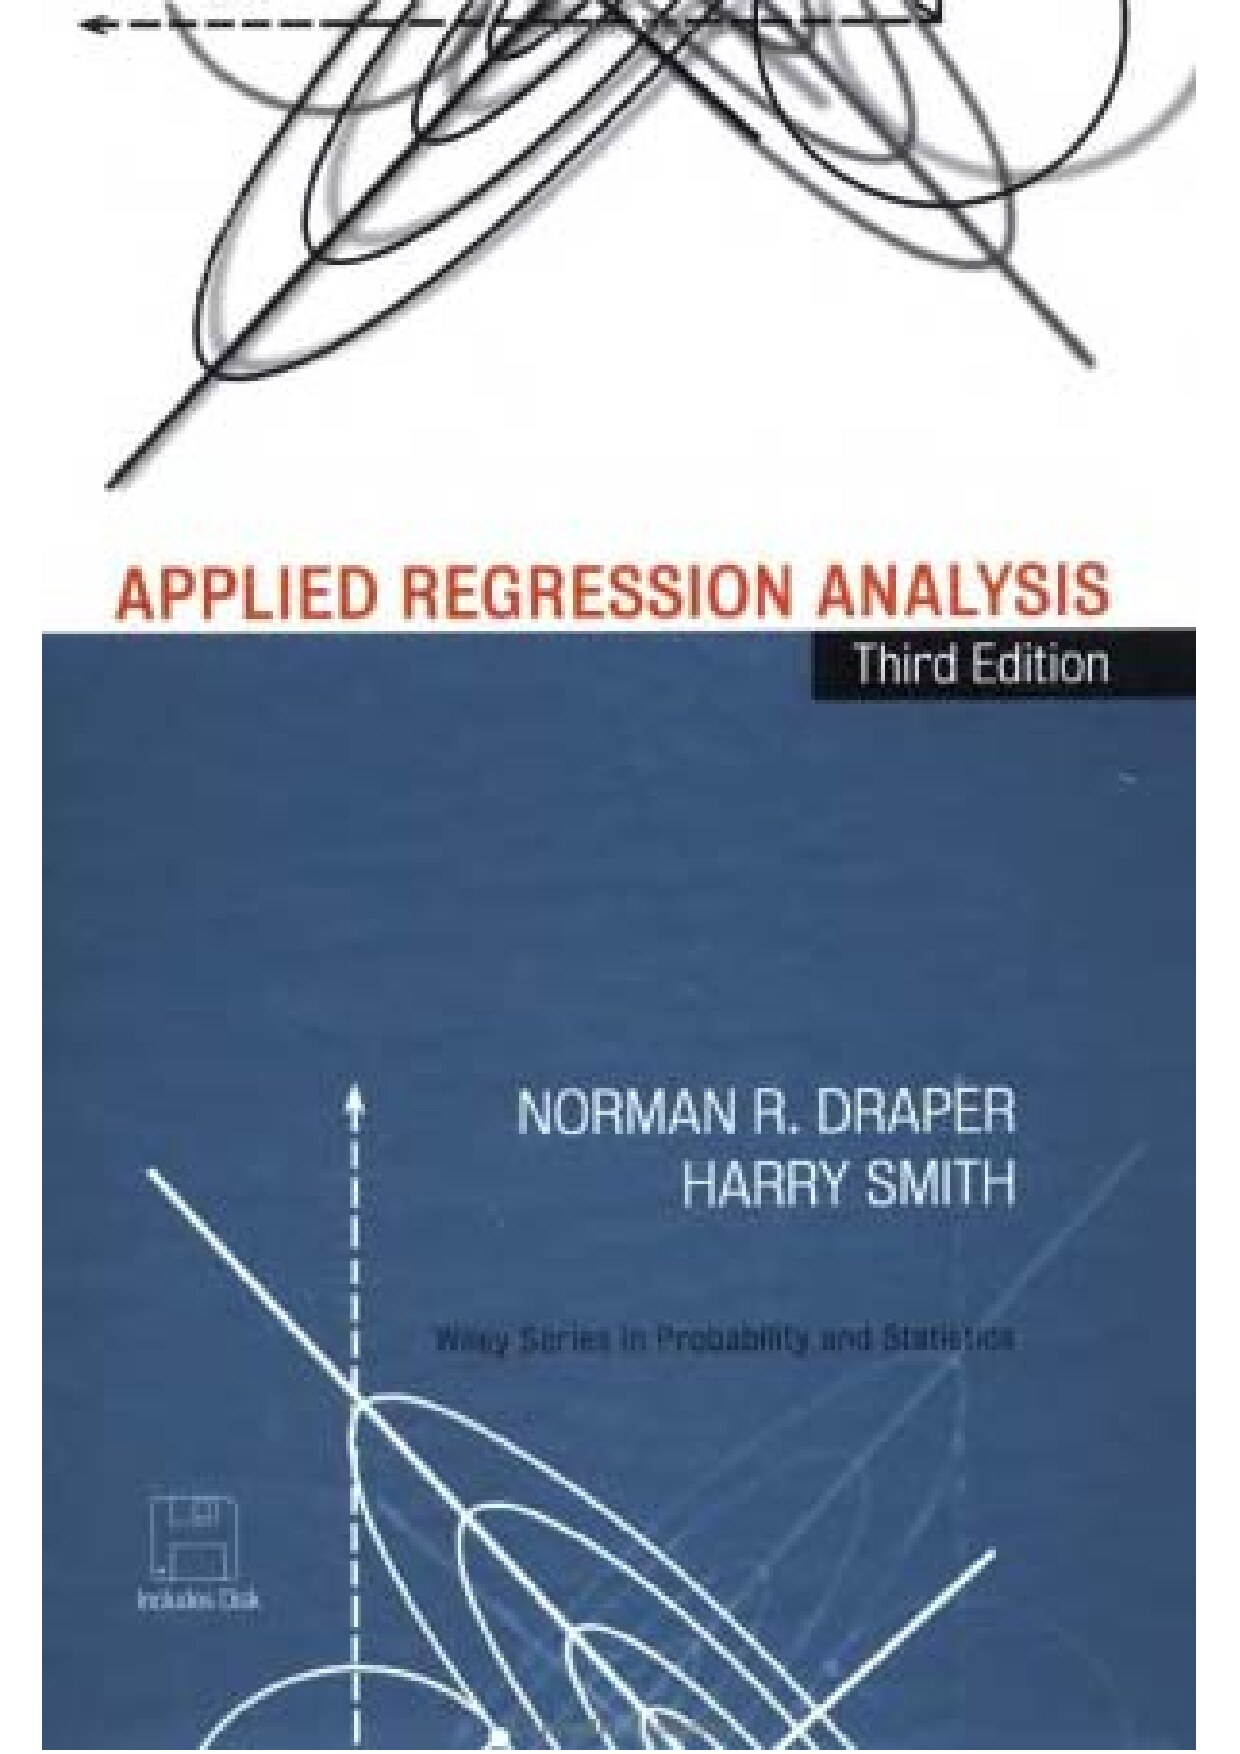 Applied Regression Analysis by Draper and Smith